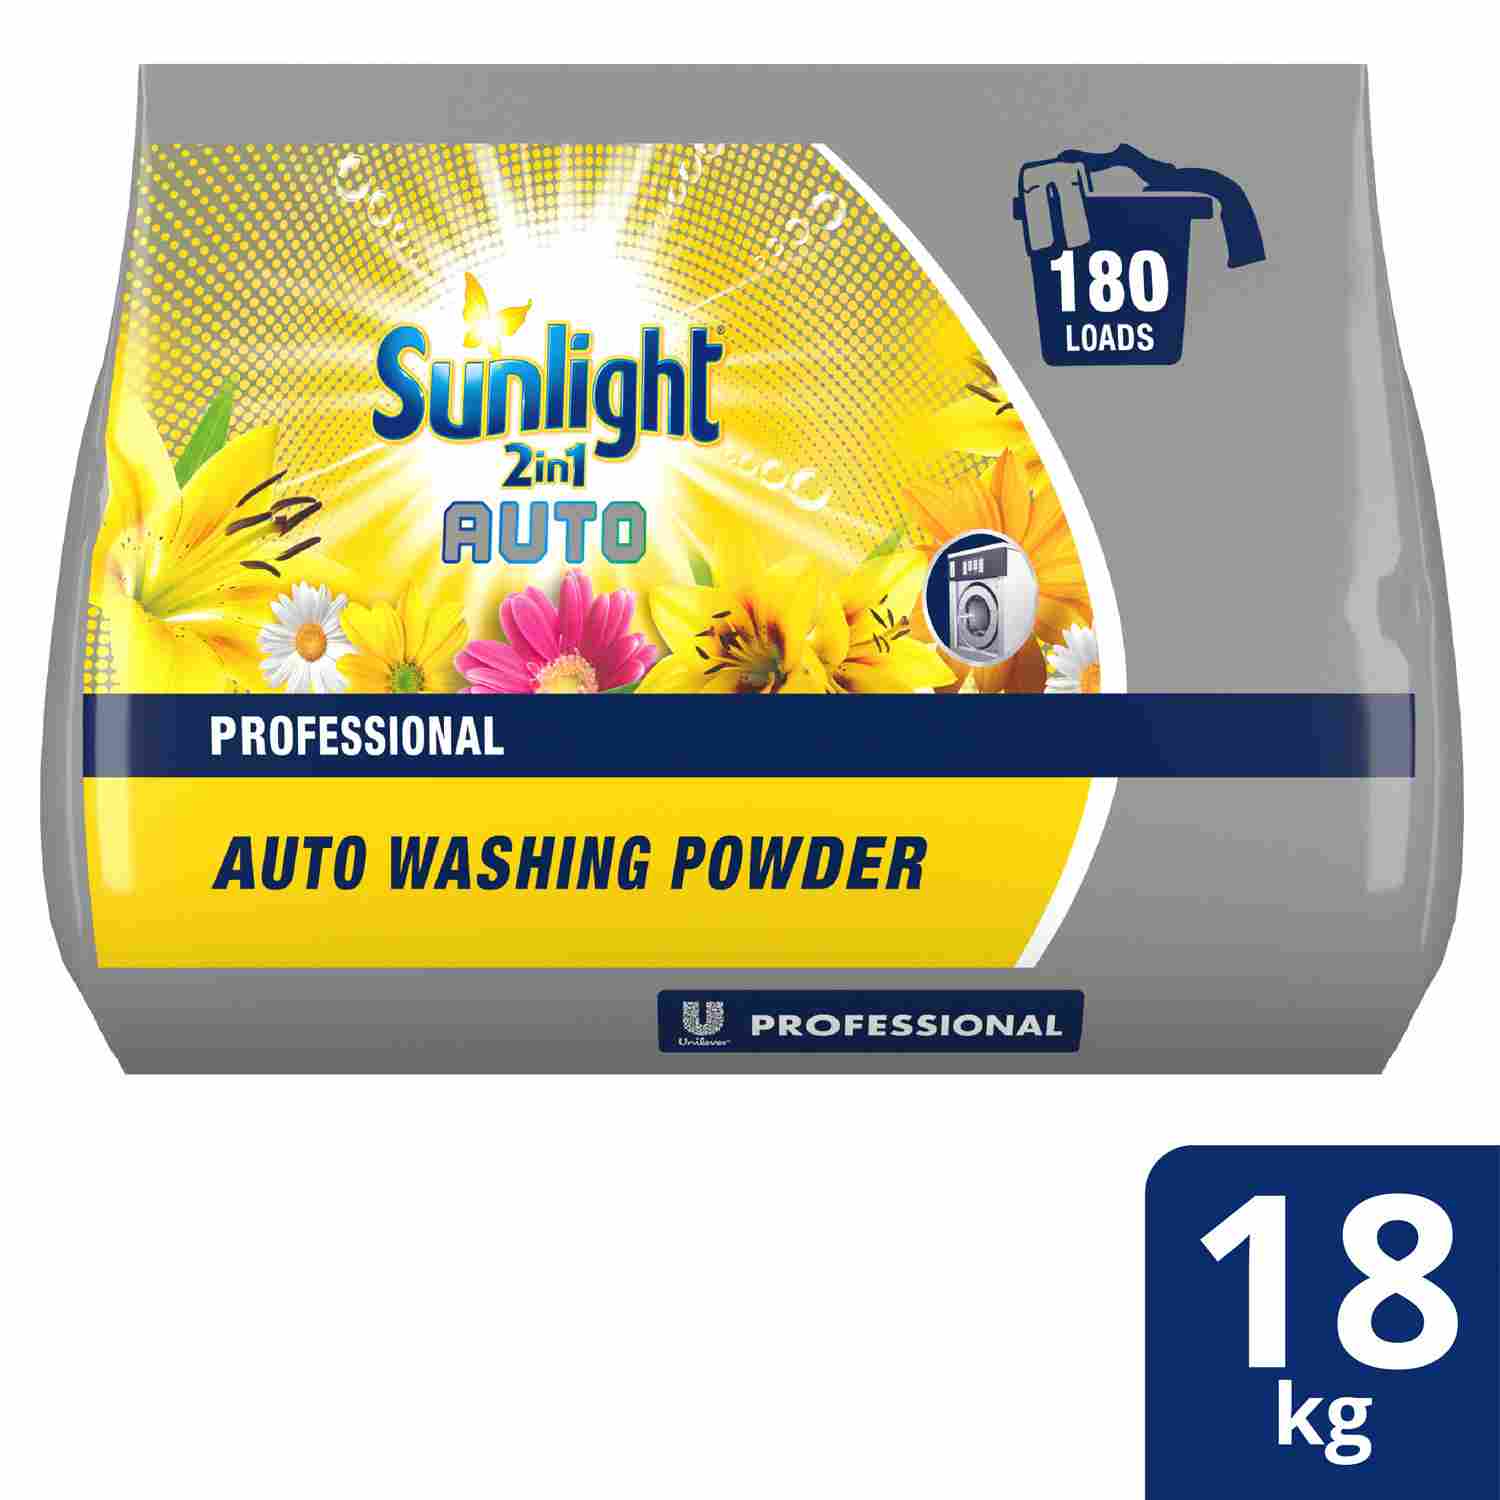 Unilever Professional Sunlight 2-in-1 Auto Washing Powder 18 Kg - Sunlight 2-in-1 Auto Washing Powder 18 kg  has a longer shelf life which means it can be bought in bulk. With Optical Brightener, it delivers a powerful clean and sensational fragrance whilst being delicate on fabrics.